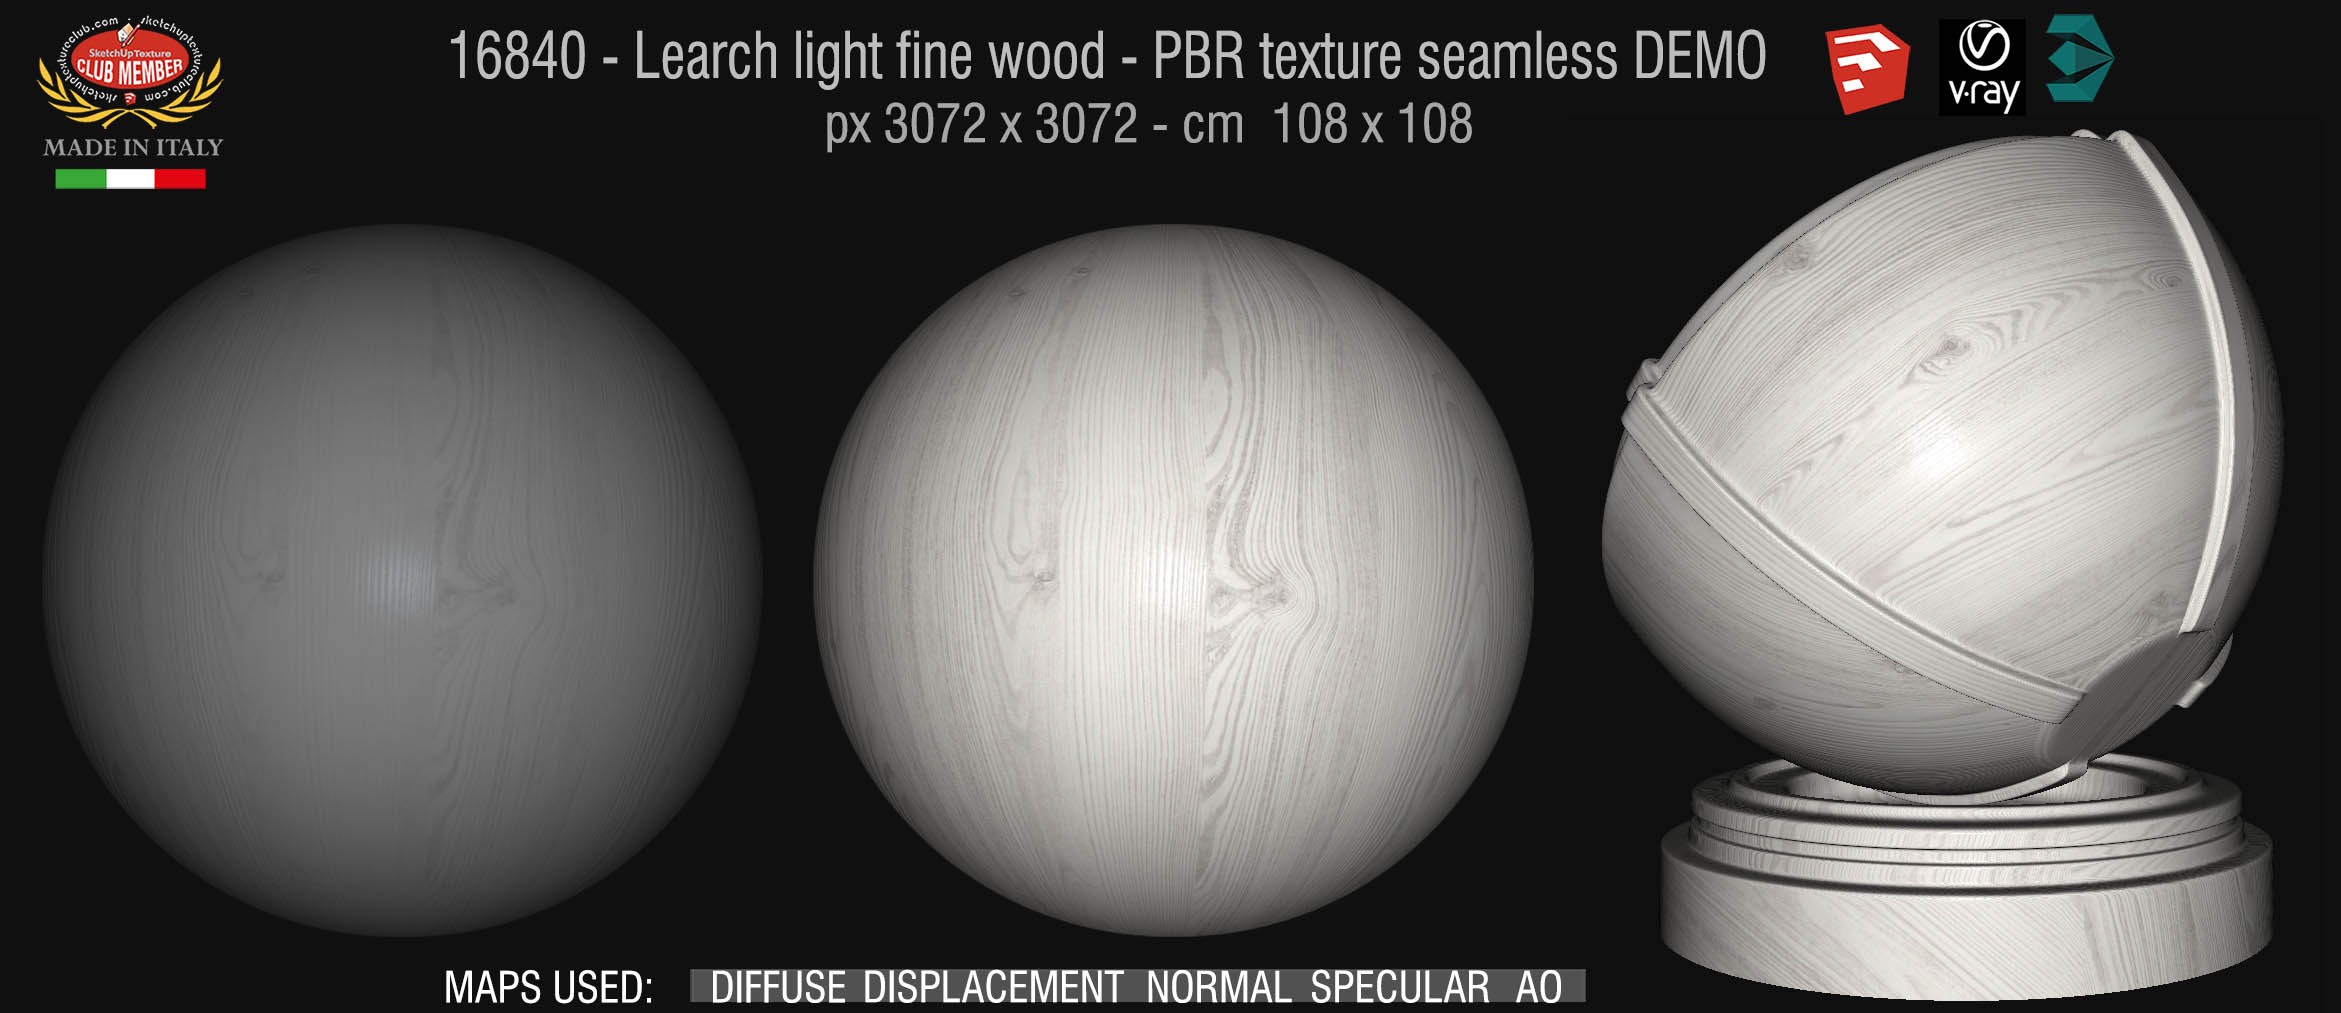 16840 Learch light fine wood - PBR texture seamless DEMO